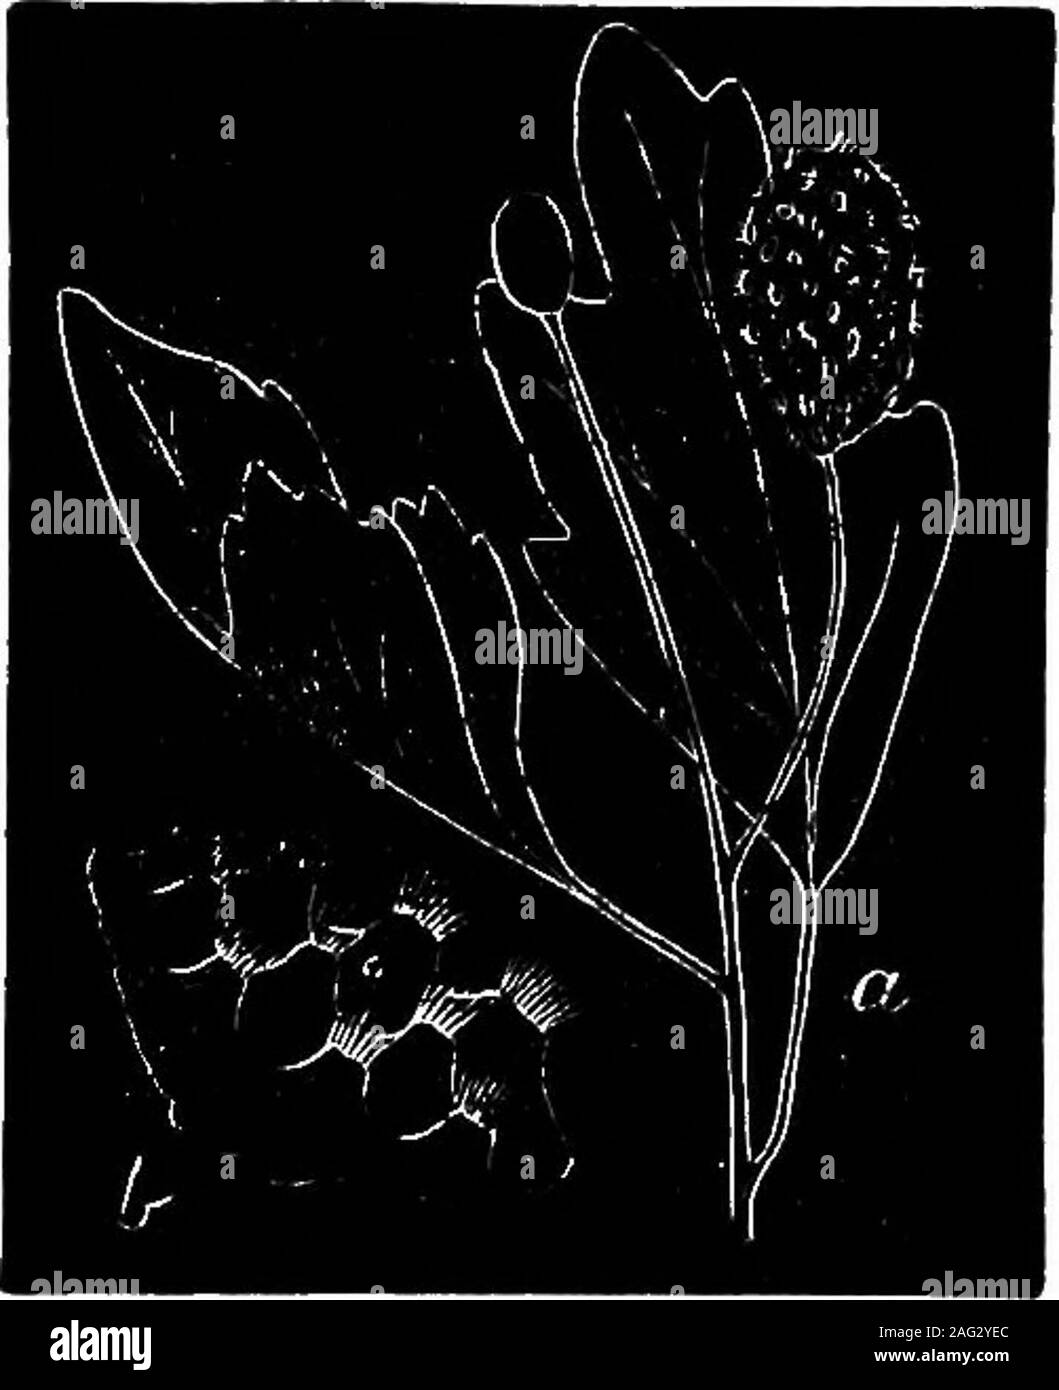 . [Scientific lectures]. 48. species of Rastelia, The R. Icuerata is seen in Fig. 28, a, natural size, living on the leavesand fruit of the hawthorn ; b, aportion magnified. The sporesare also of a light orange color,but the plant, by comparison, oreven by comparison of the cuts,may be seen to widely differ inits appearance. The fir andpine also suffer, as they areoften attacked by the Perider-minum, which changes the foli-age, and spoils the effect of theirbranches, rendering them un-Fg- 28. sightly. Unfortunately but little is known of this fungus, but it is well worthy of attention from tho Stock Photo